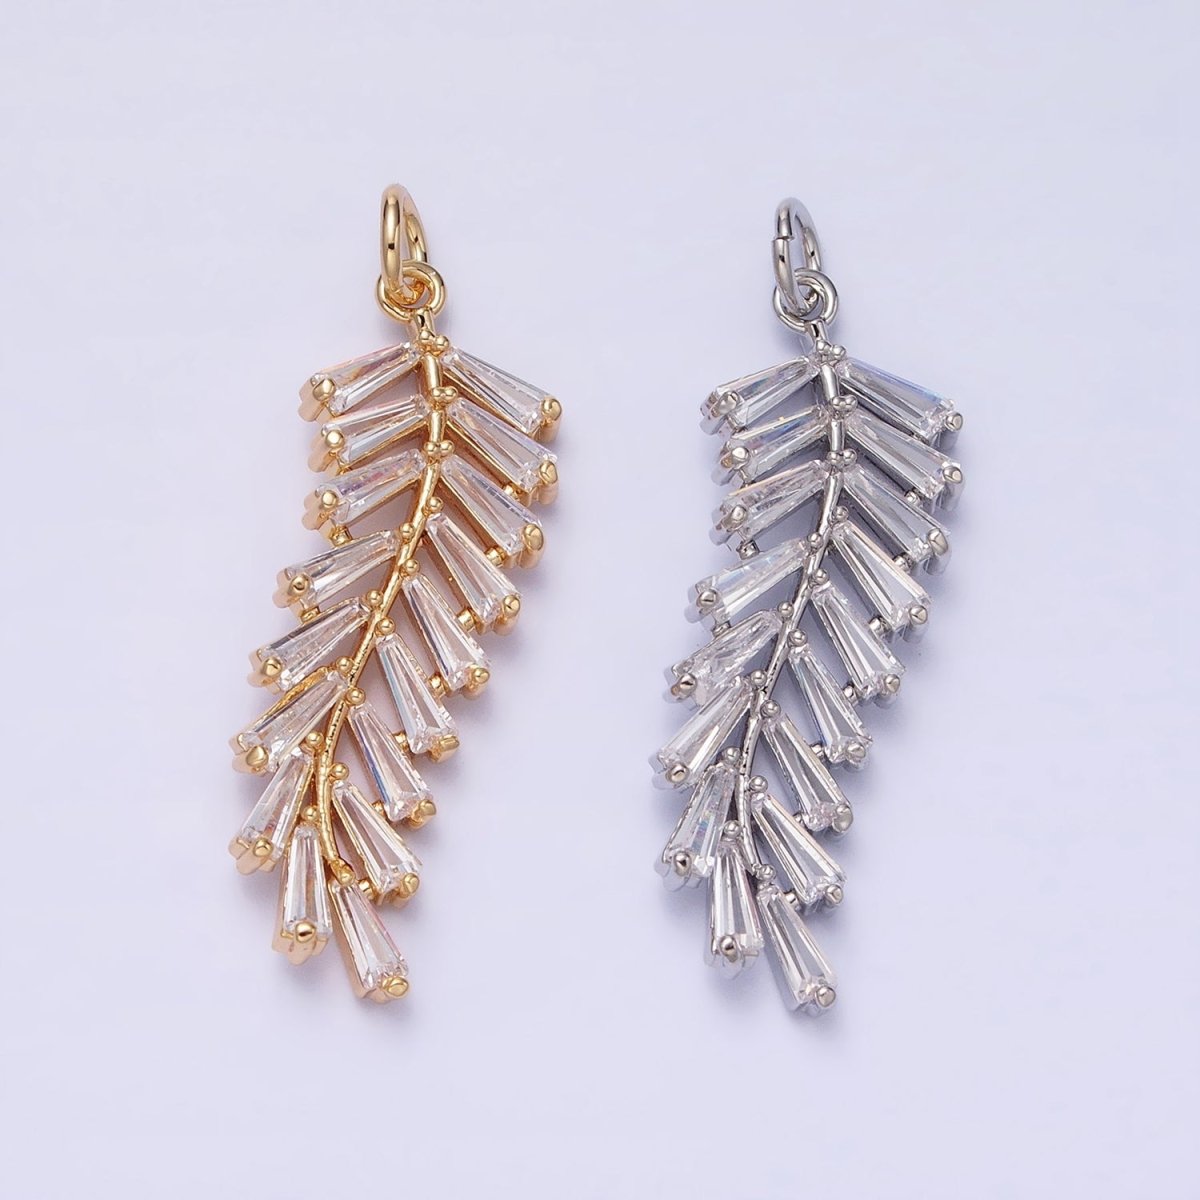 Gold Olive Branch Charm, Clear Baguette Cz Leaf Charm Pendant Jewelry Supplies AC467 AC468 - DLUXCA